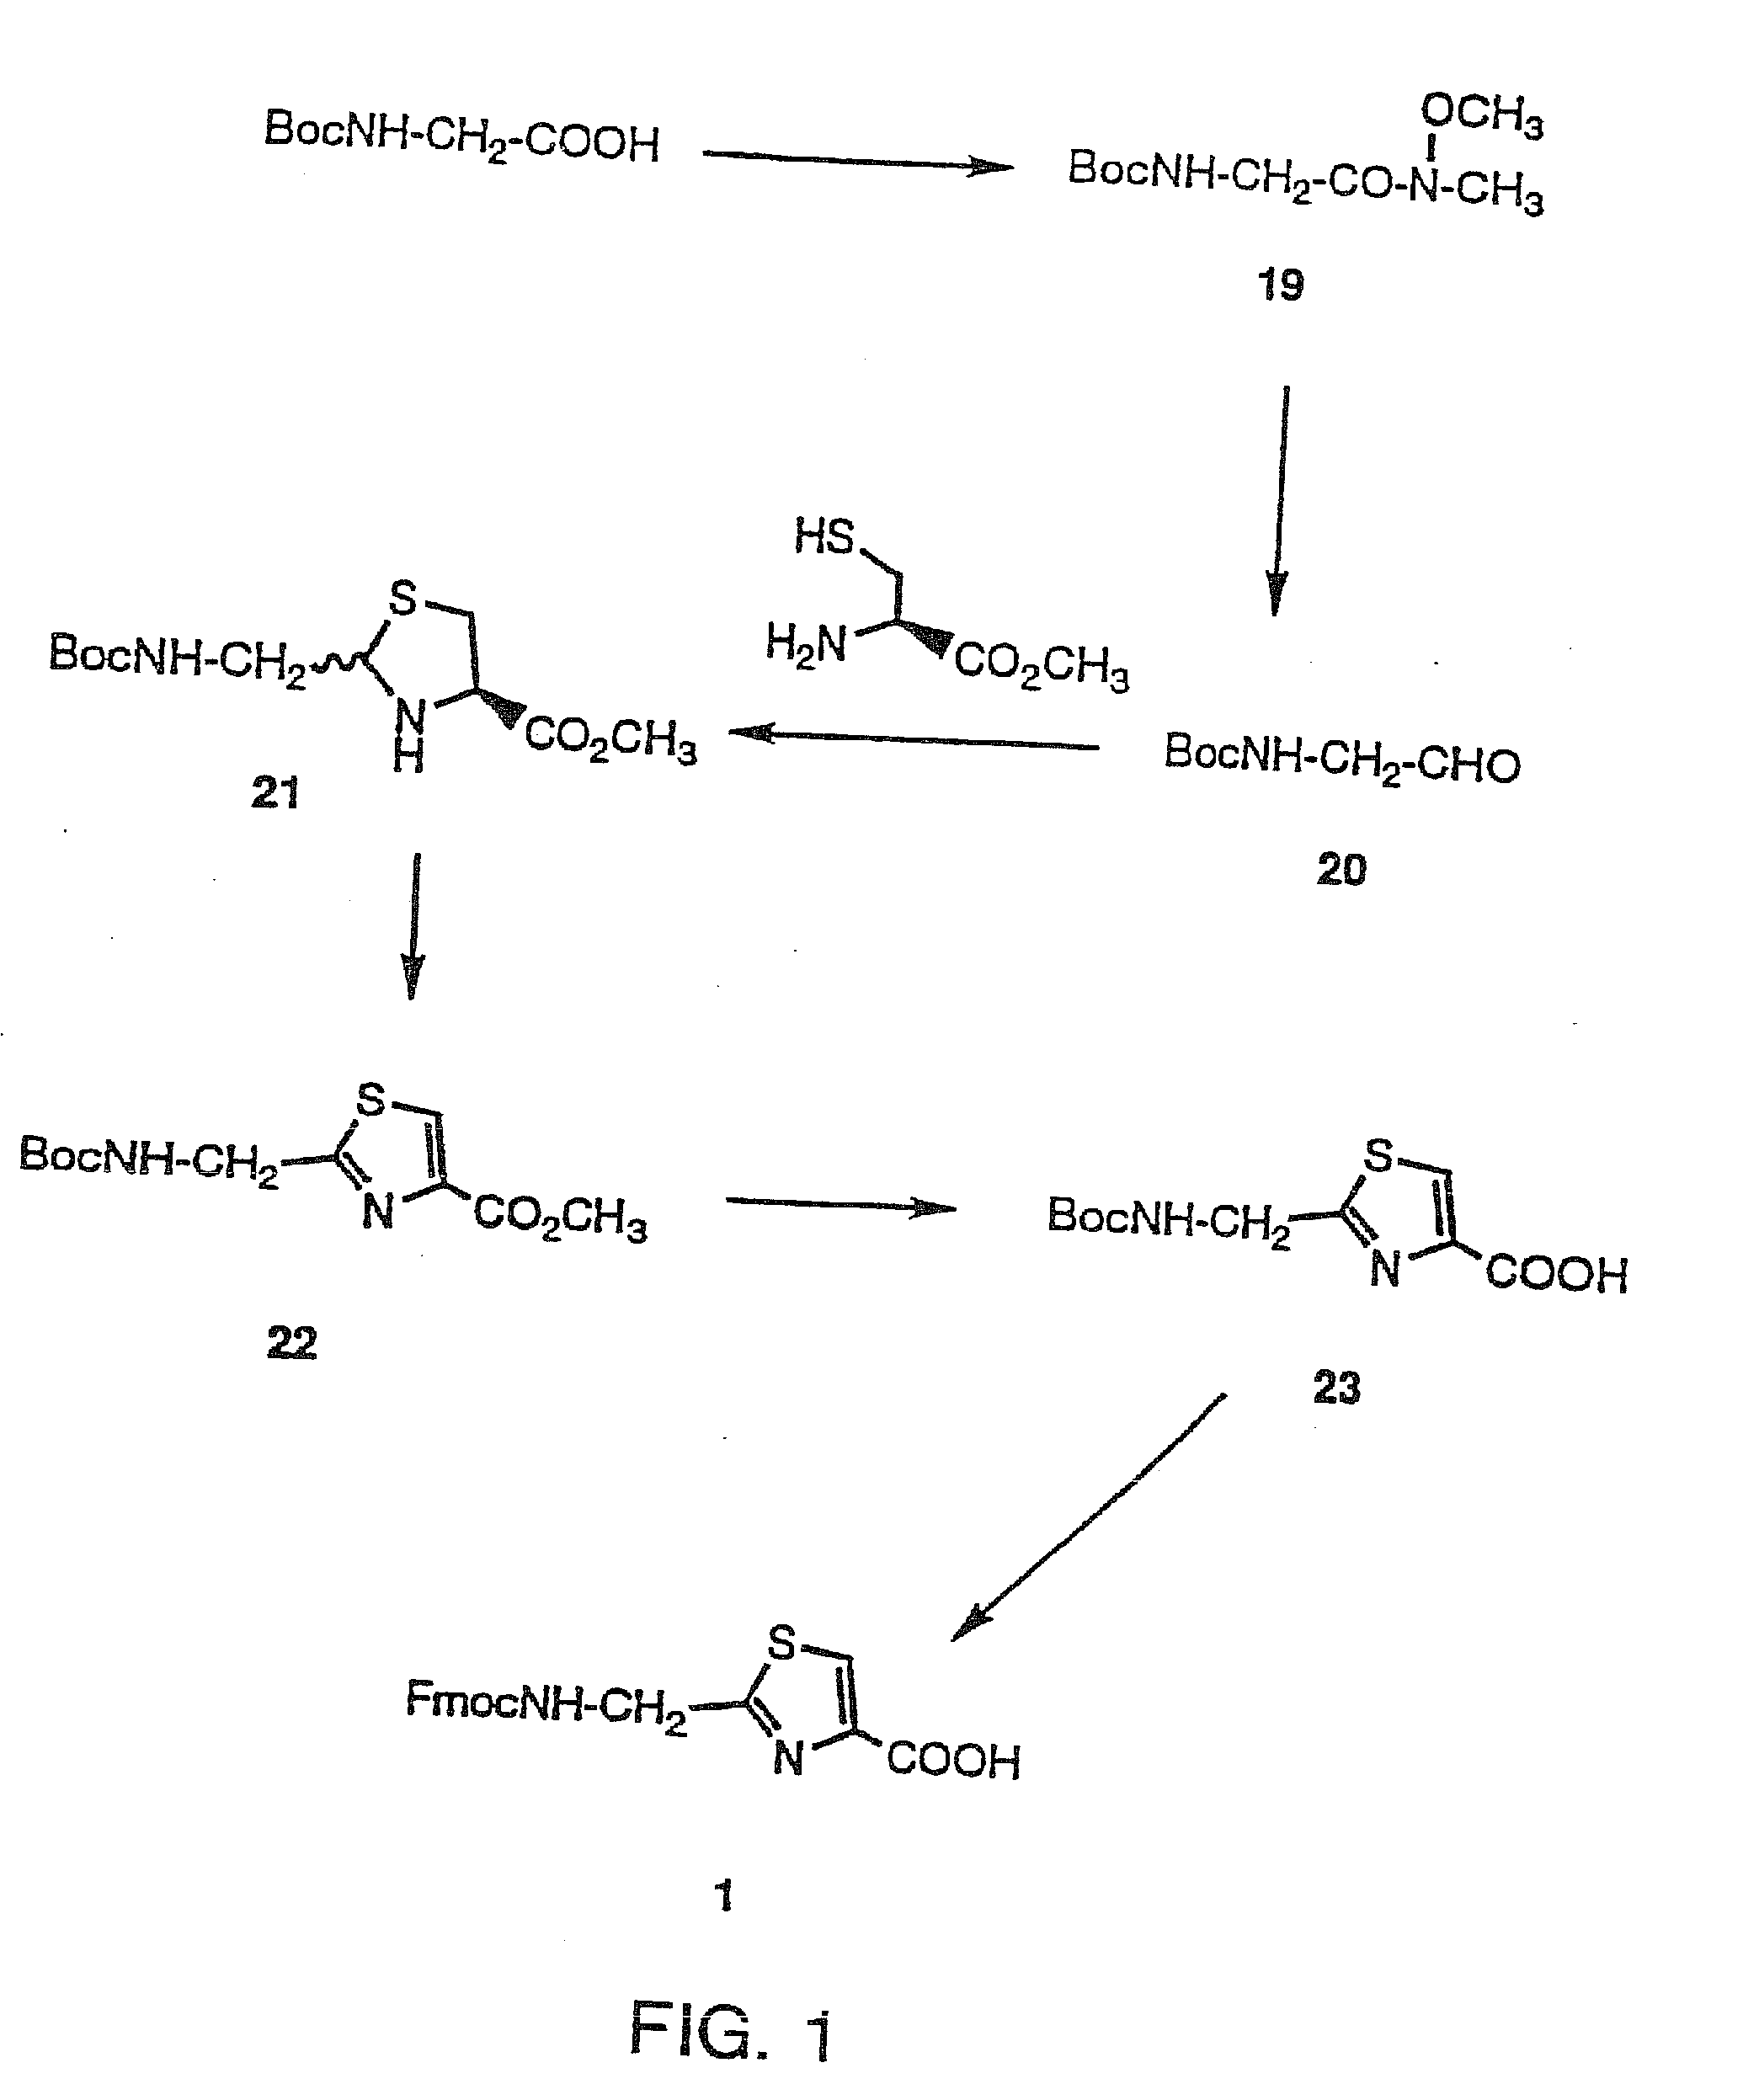 Oxazole and thiazole combinatorial libraries